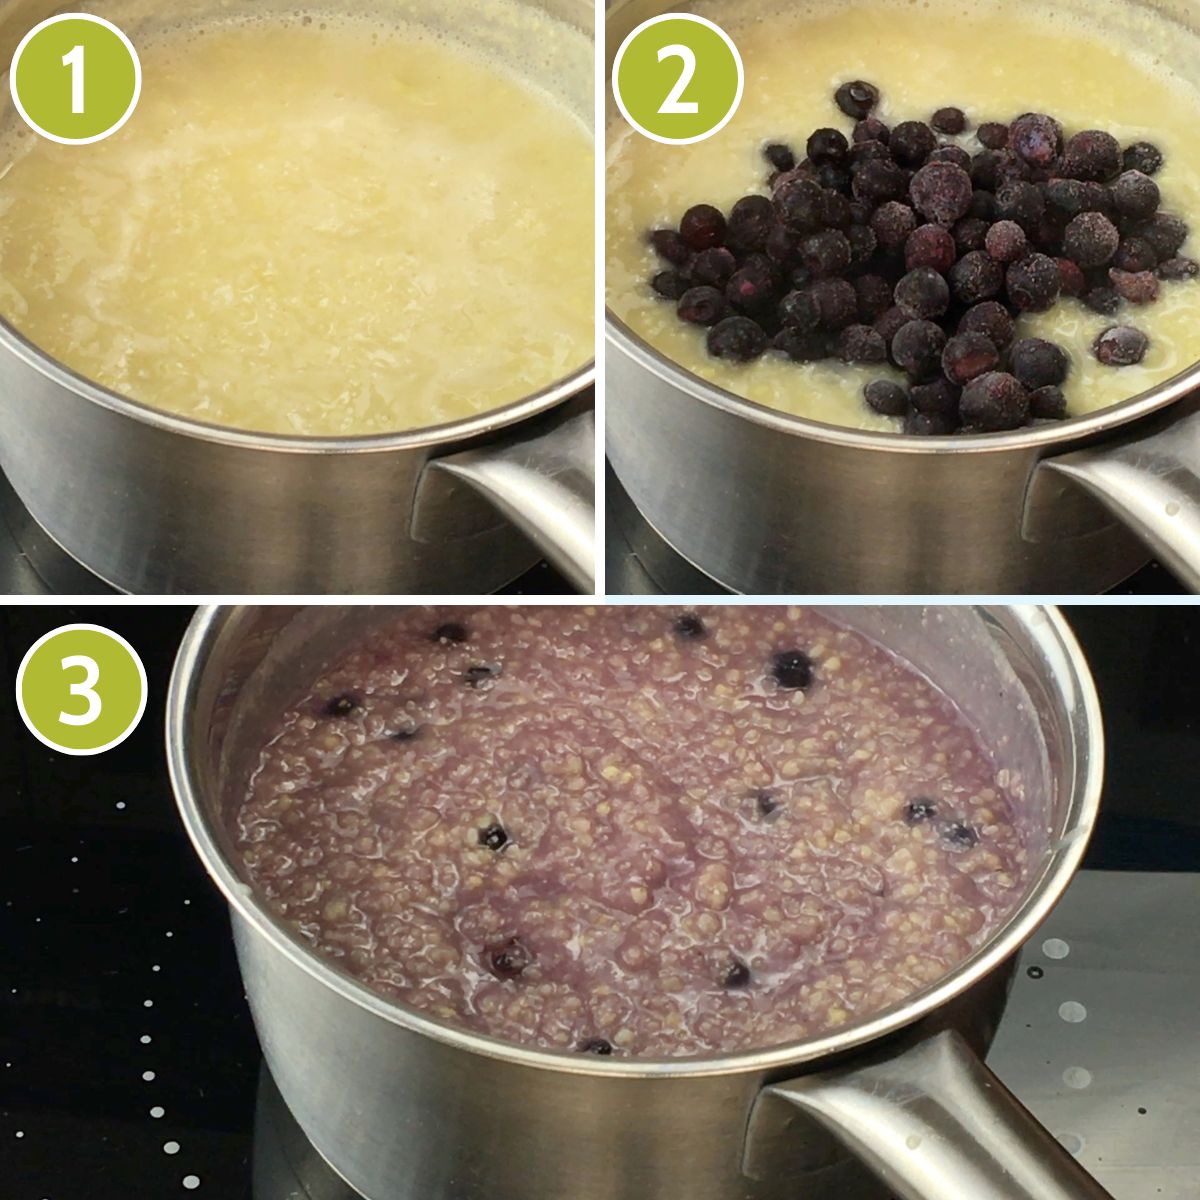 3 photo collage showing how to cook millet porridge in a saucepan. First shows a bubbling water with millet, then frozen blueberries, finally a creamy purple porridge. 